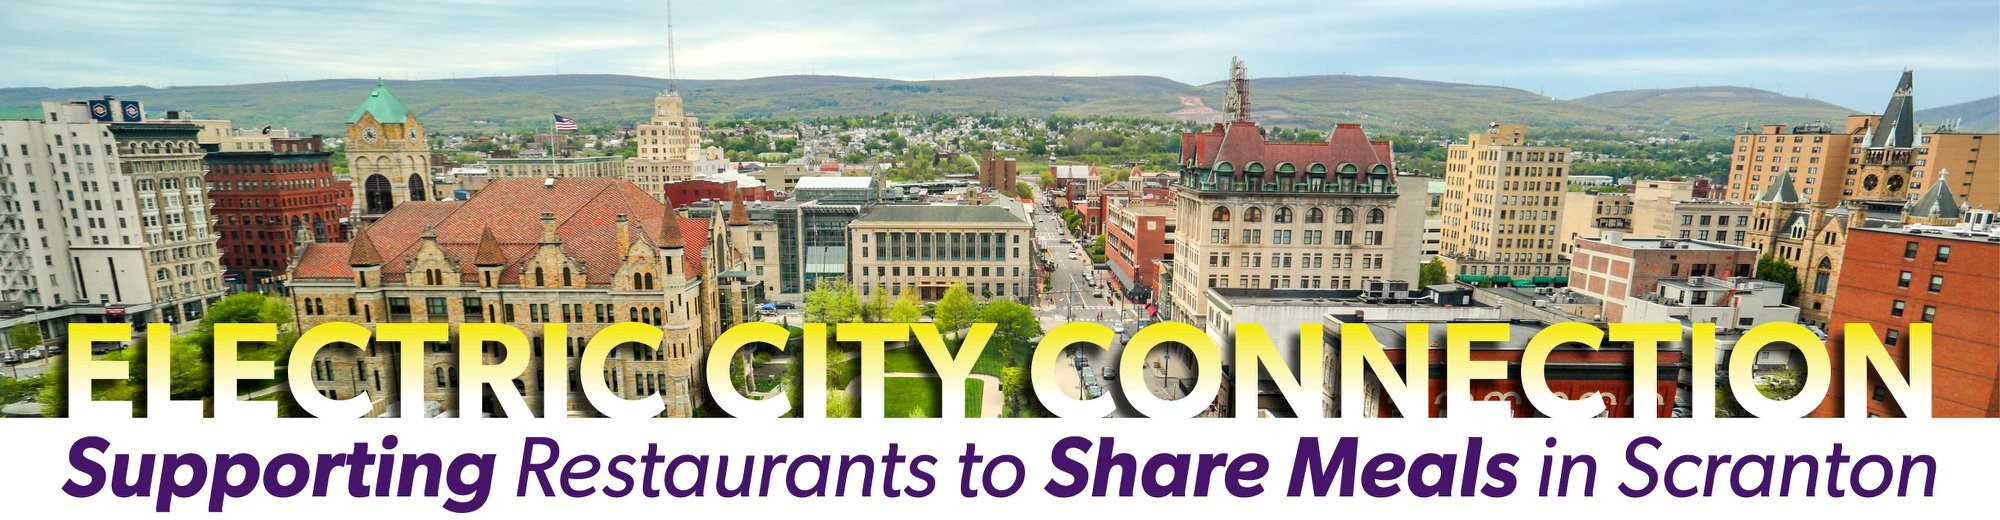 image-electric-city-connection-banner.jpg